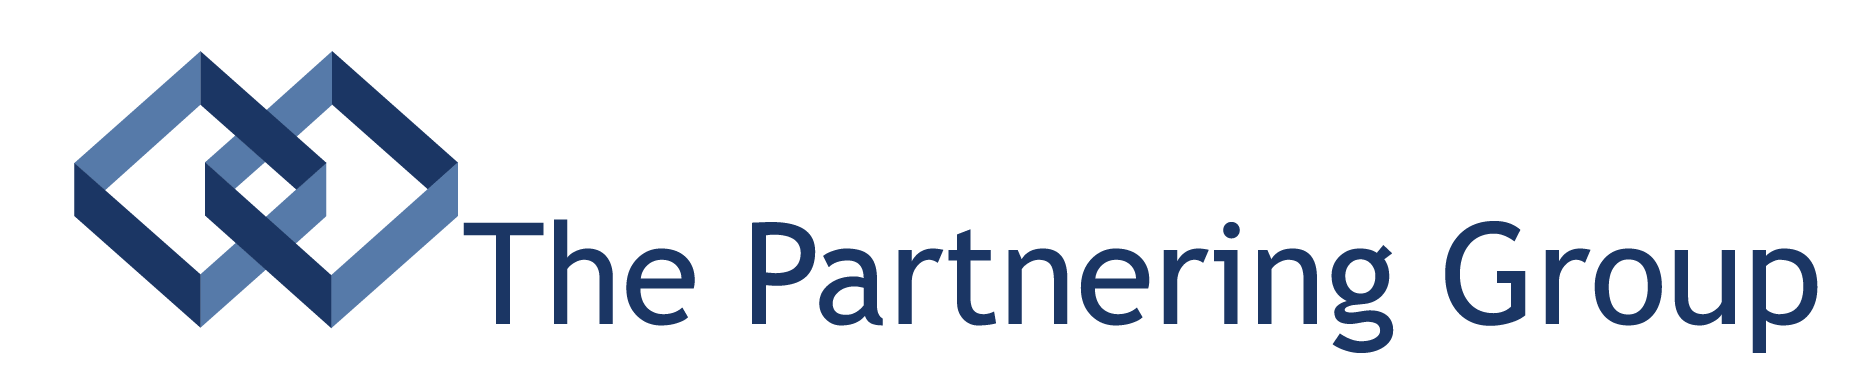 The Partnering Group